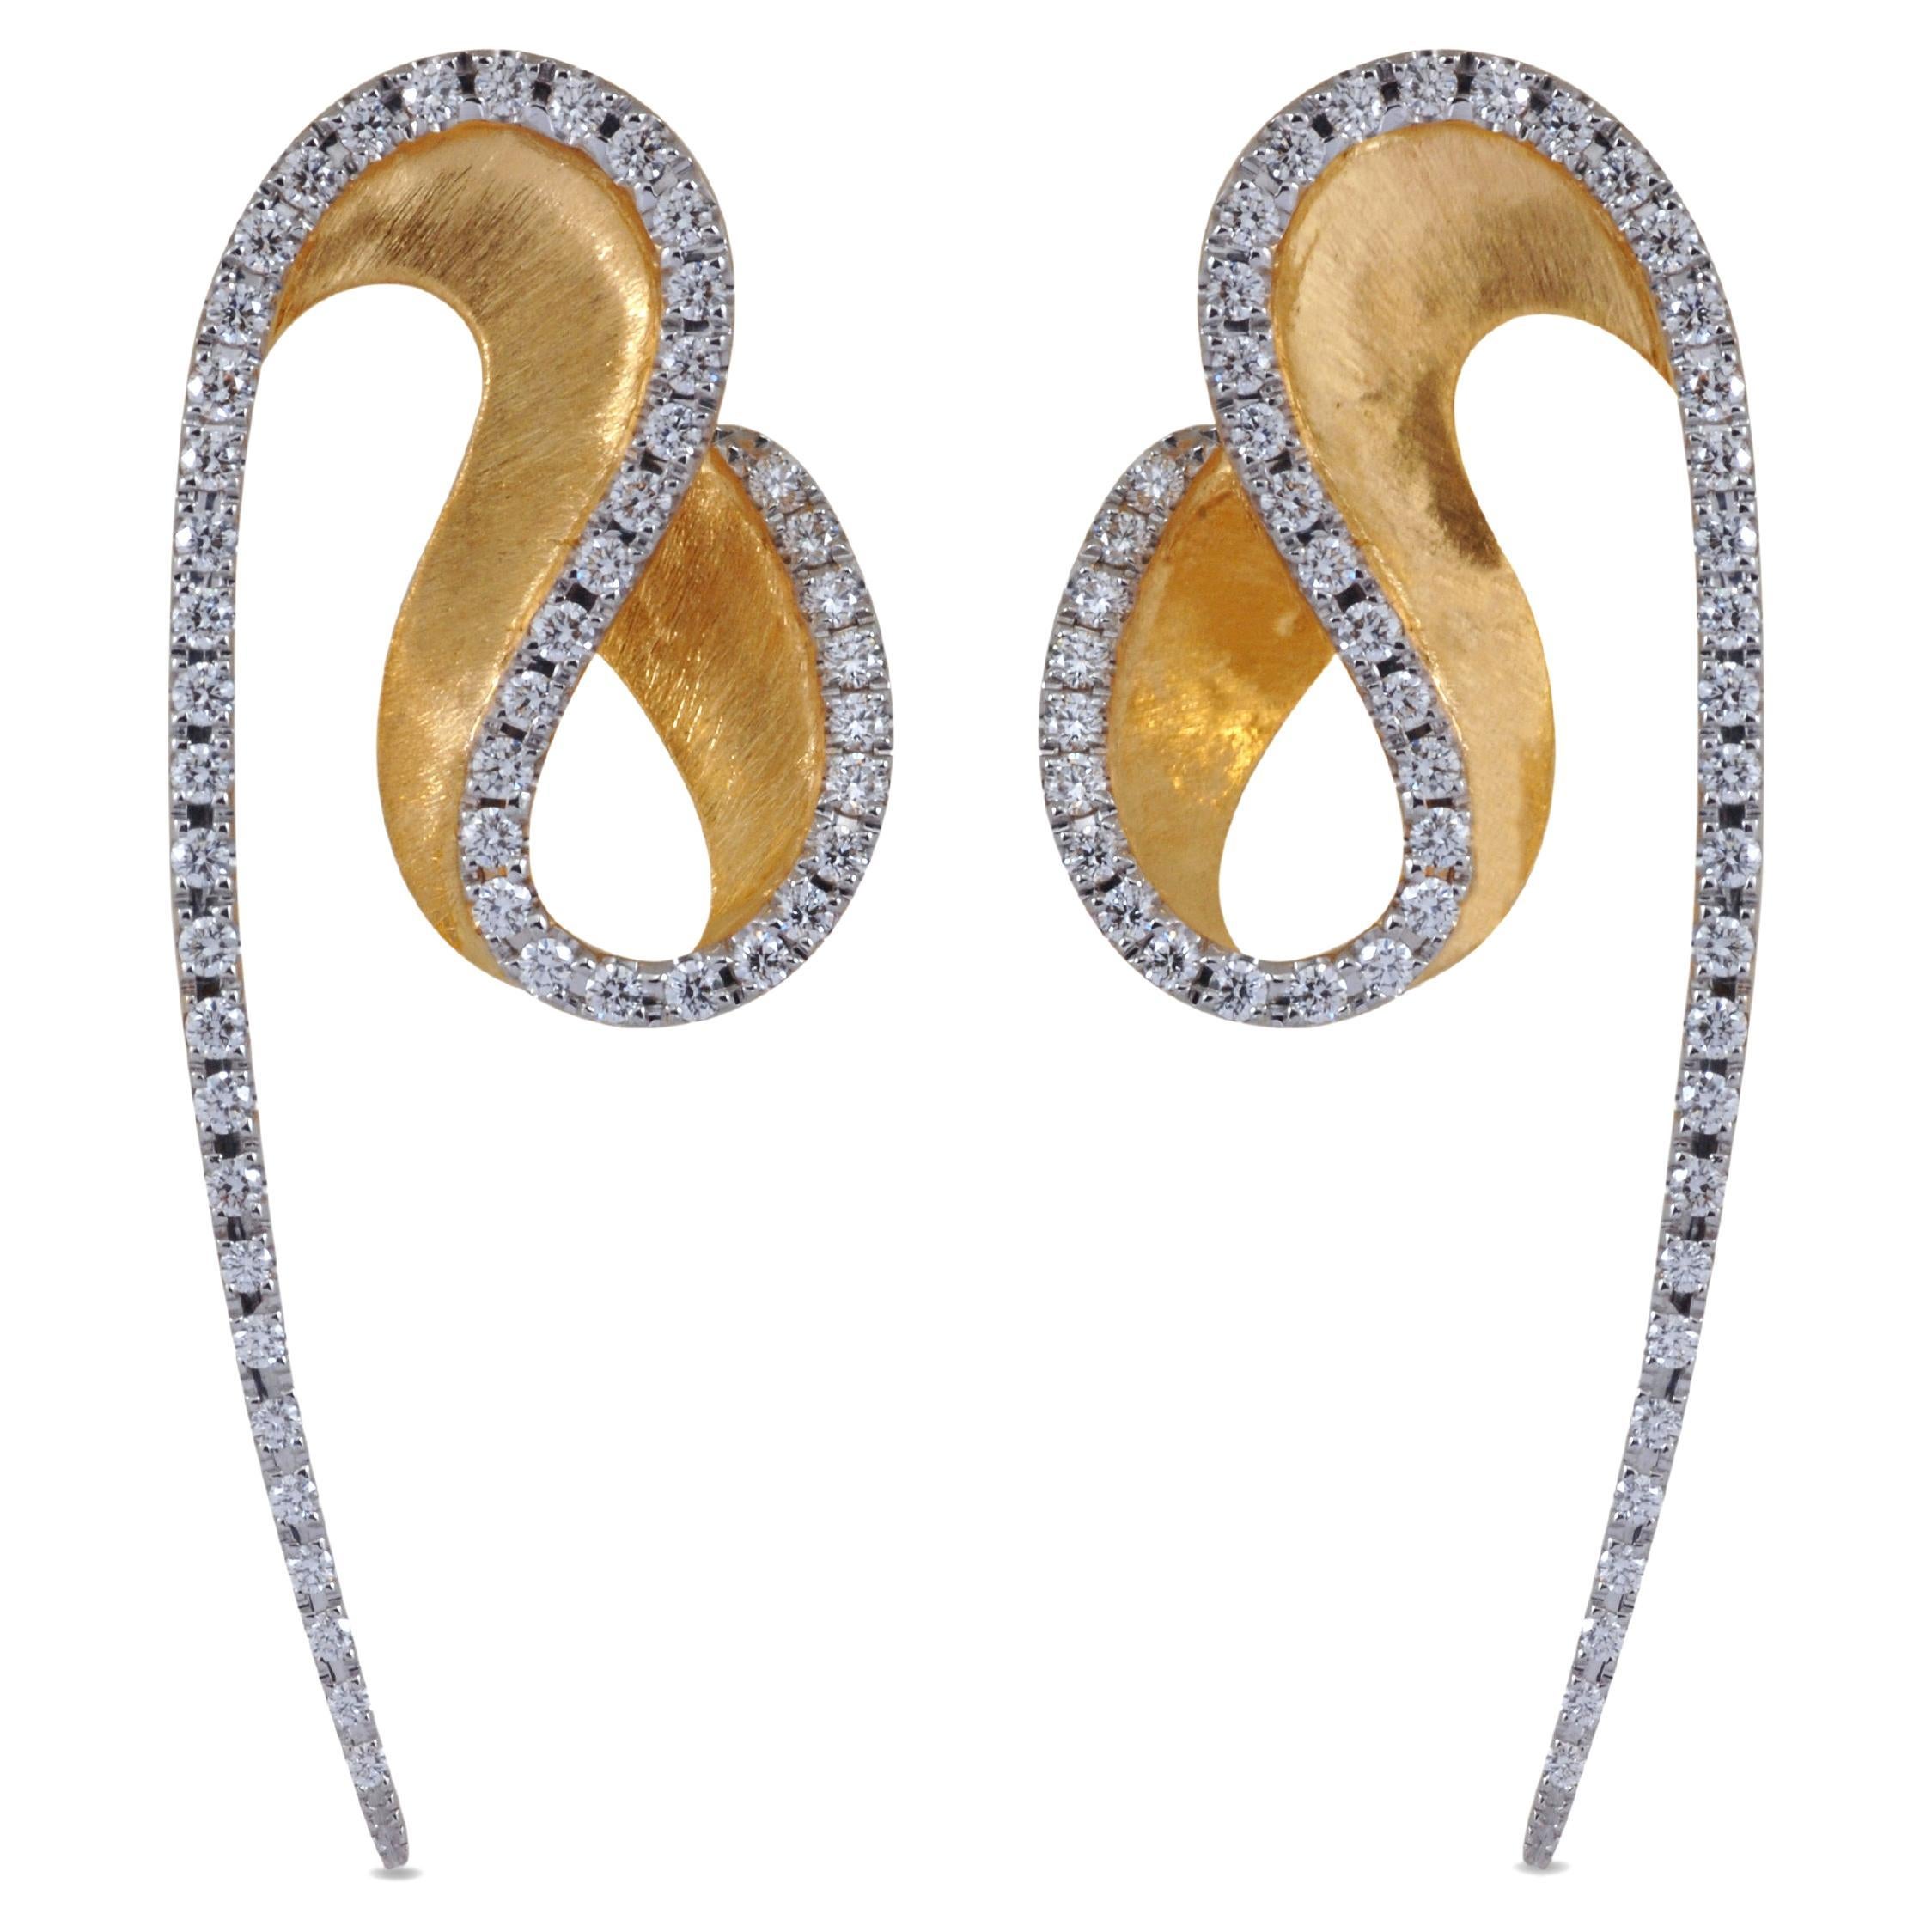 Talay Wave Brushed Gold Diamond Earrings 18k Gold